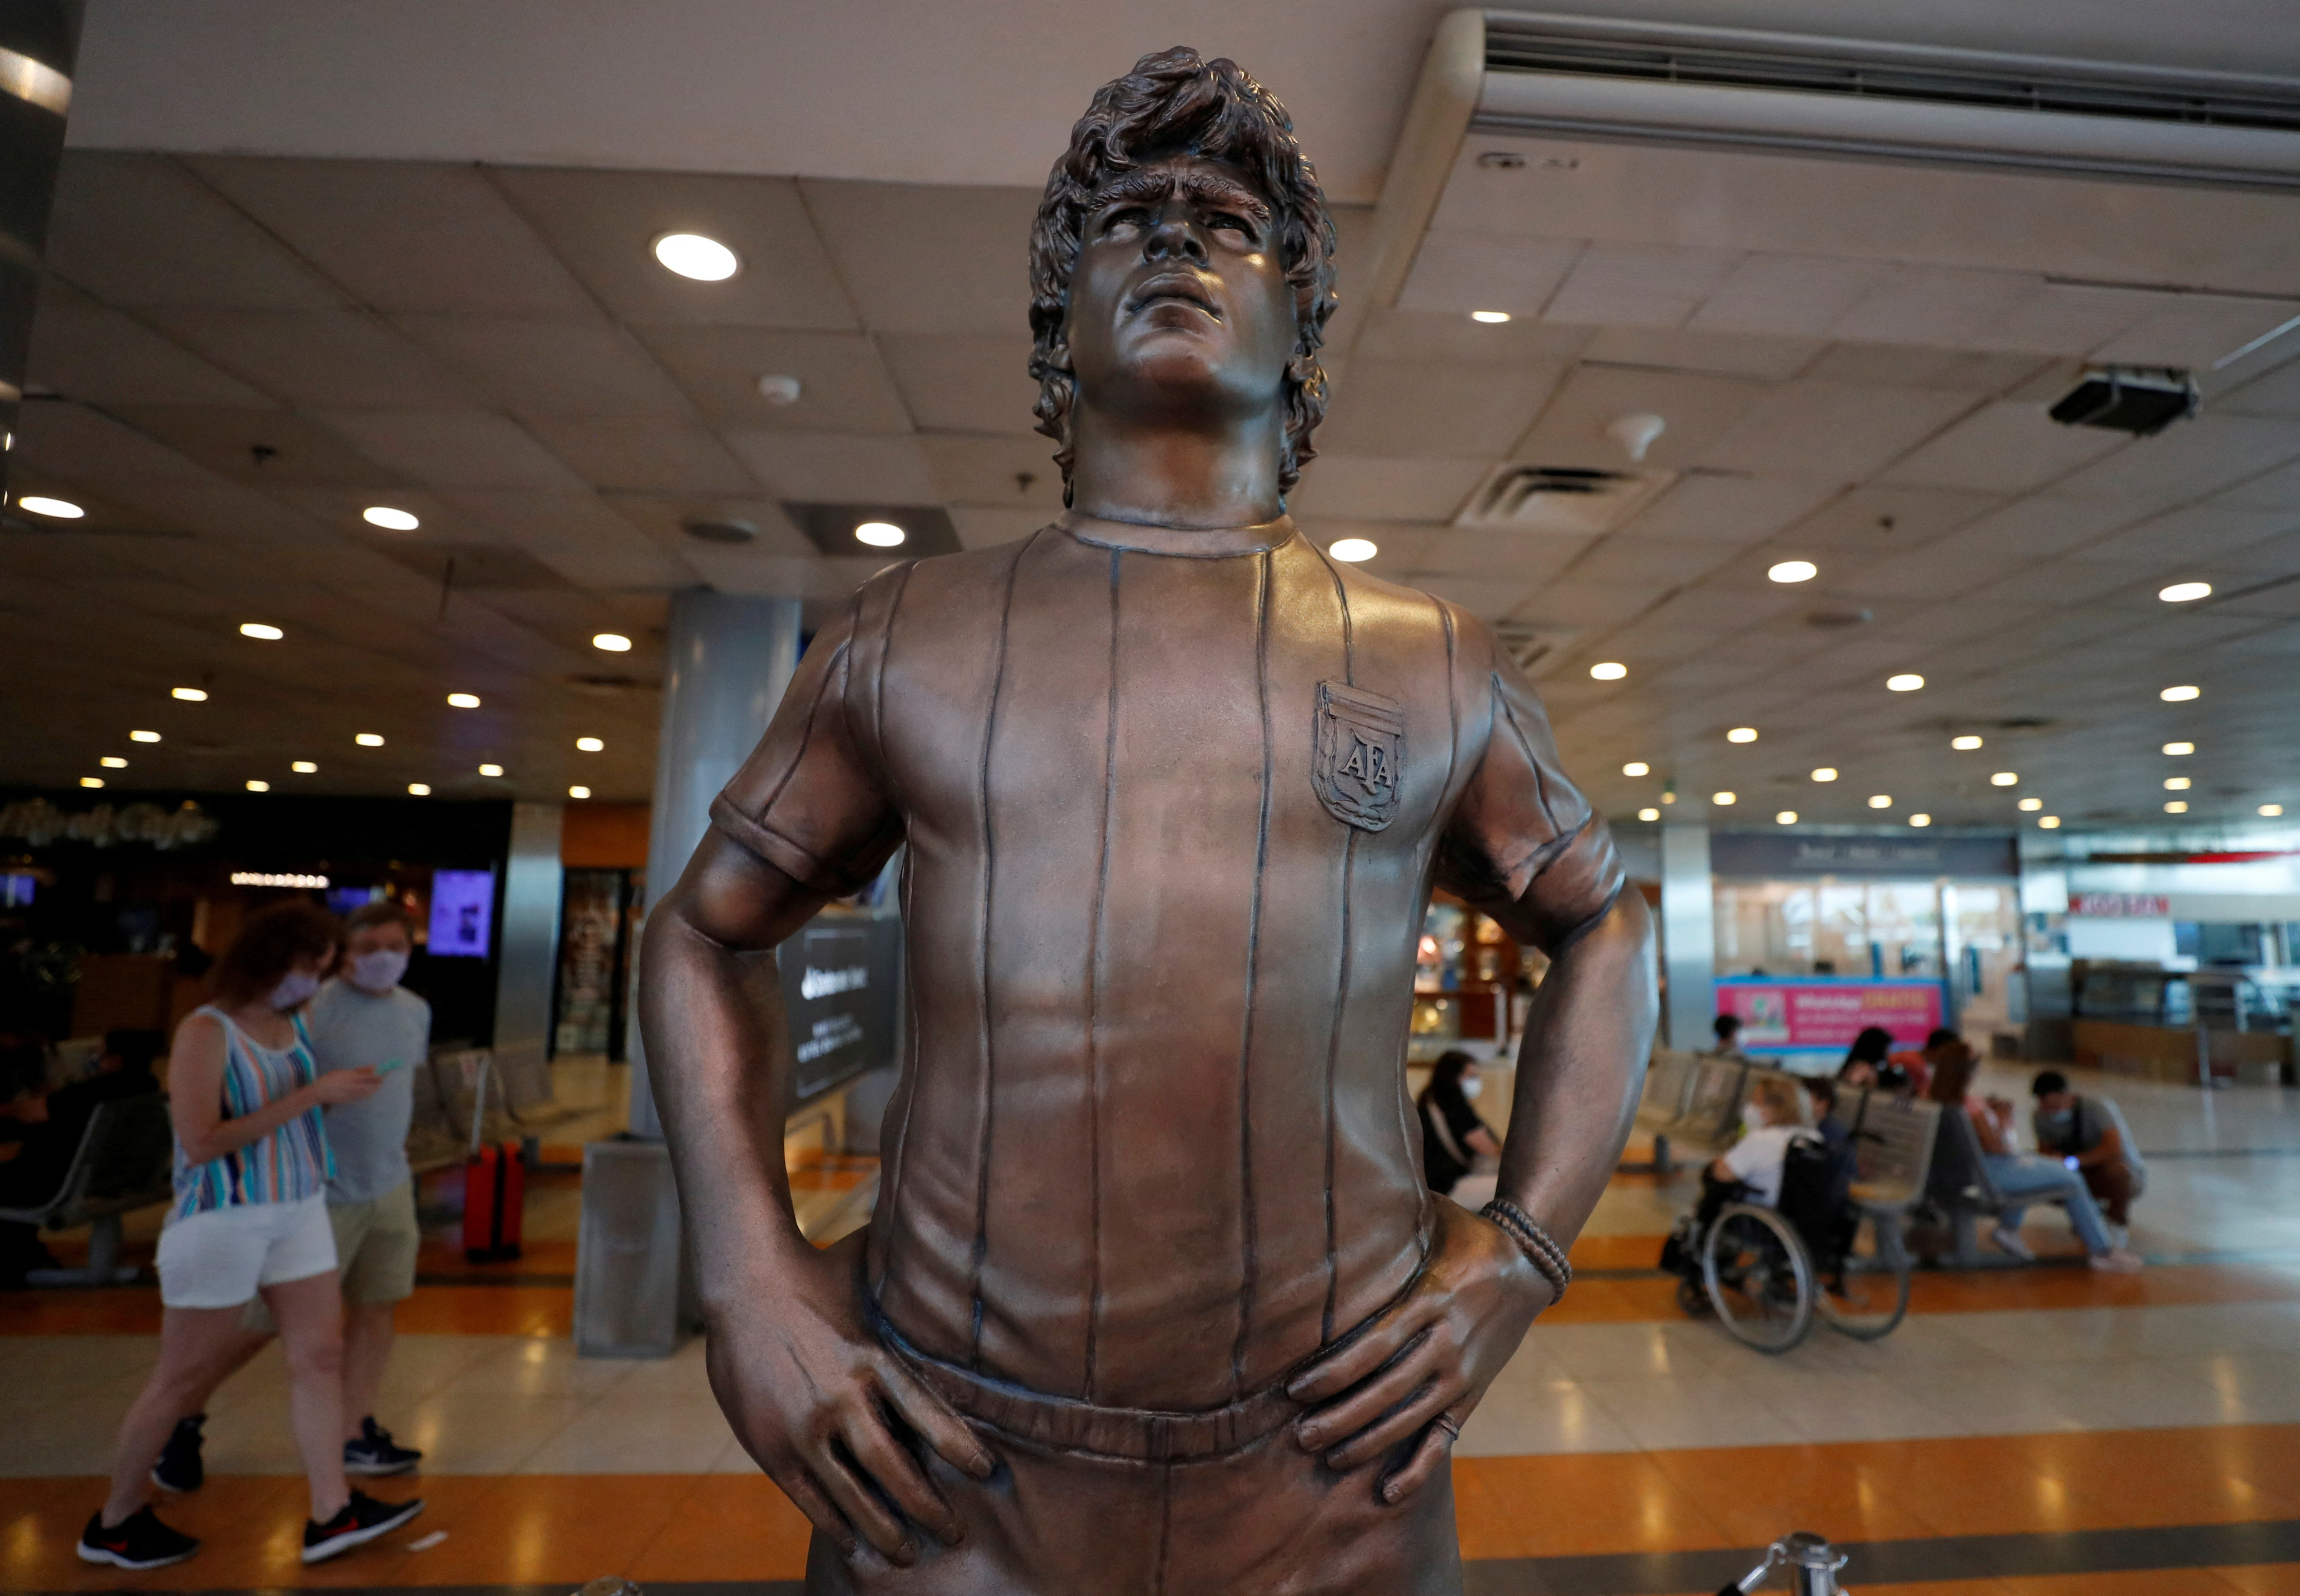 Maradona statue pays tribute to soccer star's legacy in Argentine airport